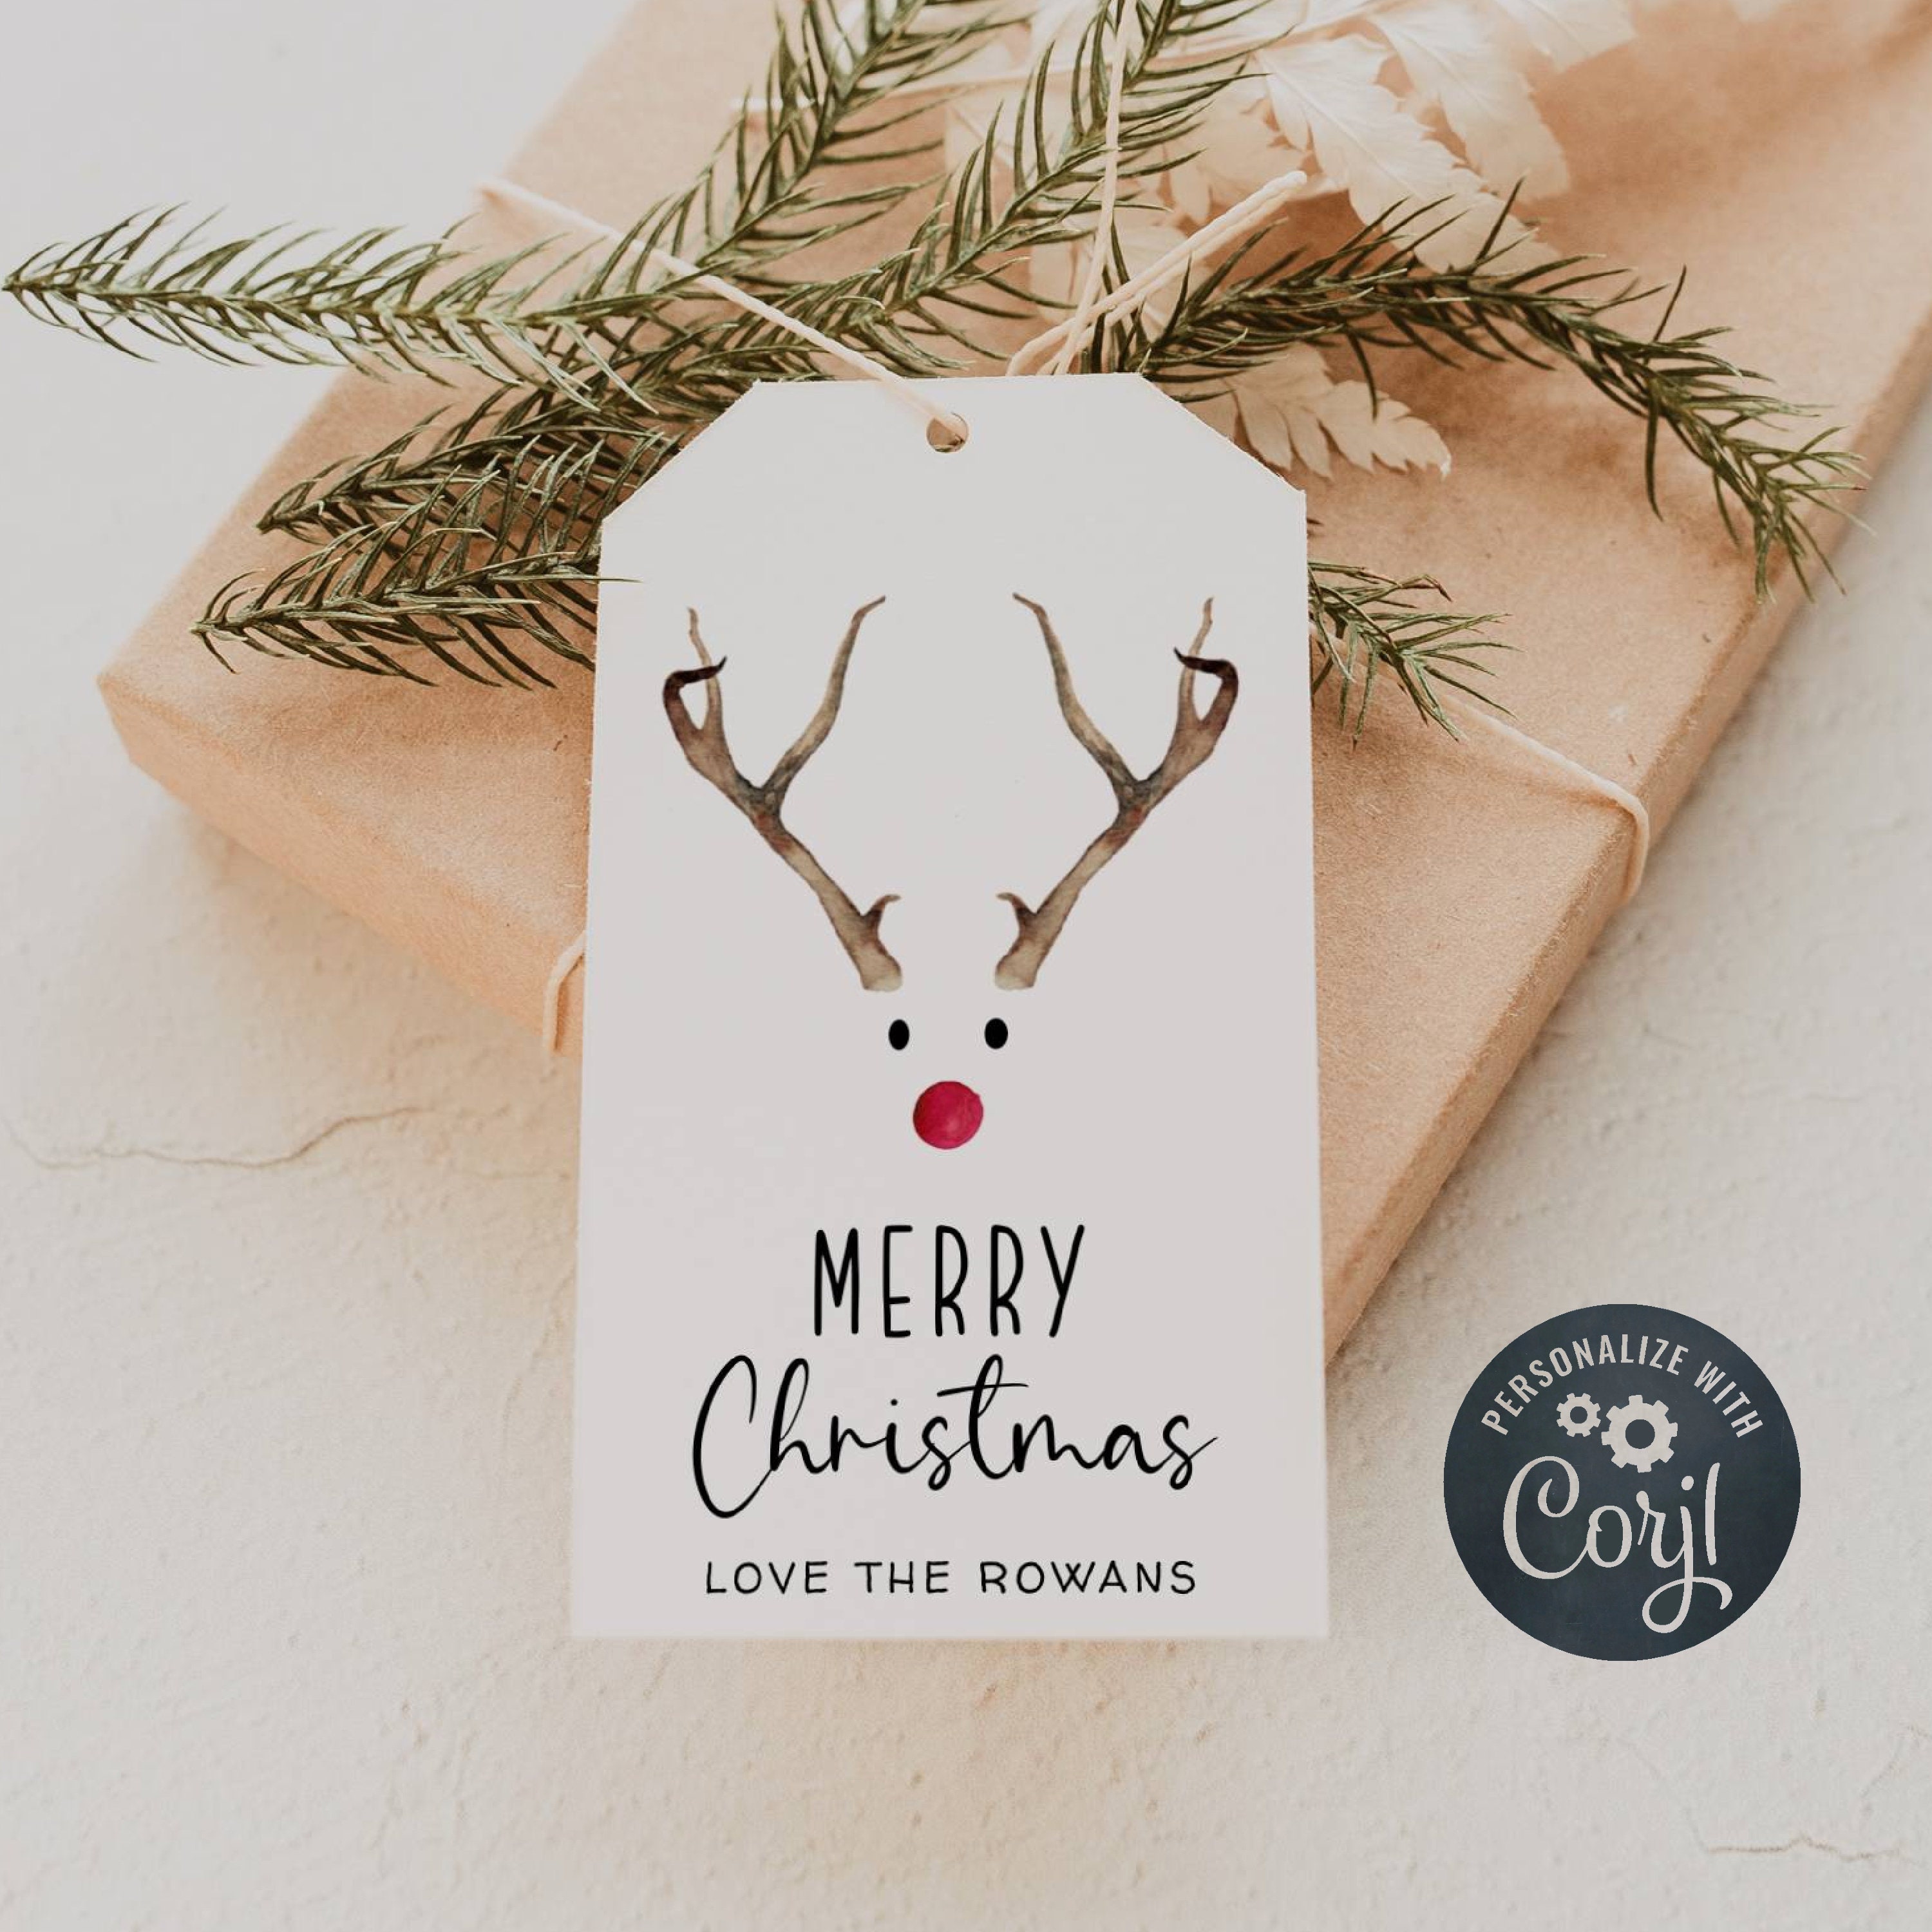 DIY Stained Wood Holiday Gift Tags - Crafting Cheerfully